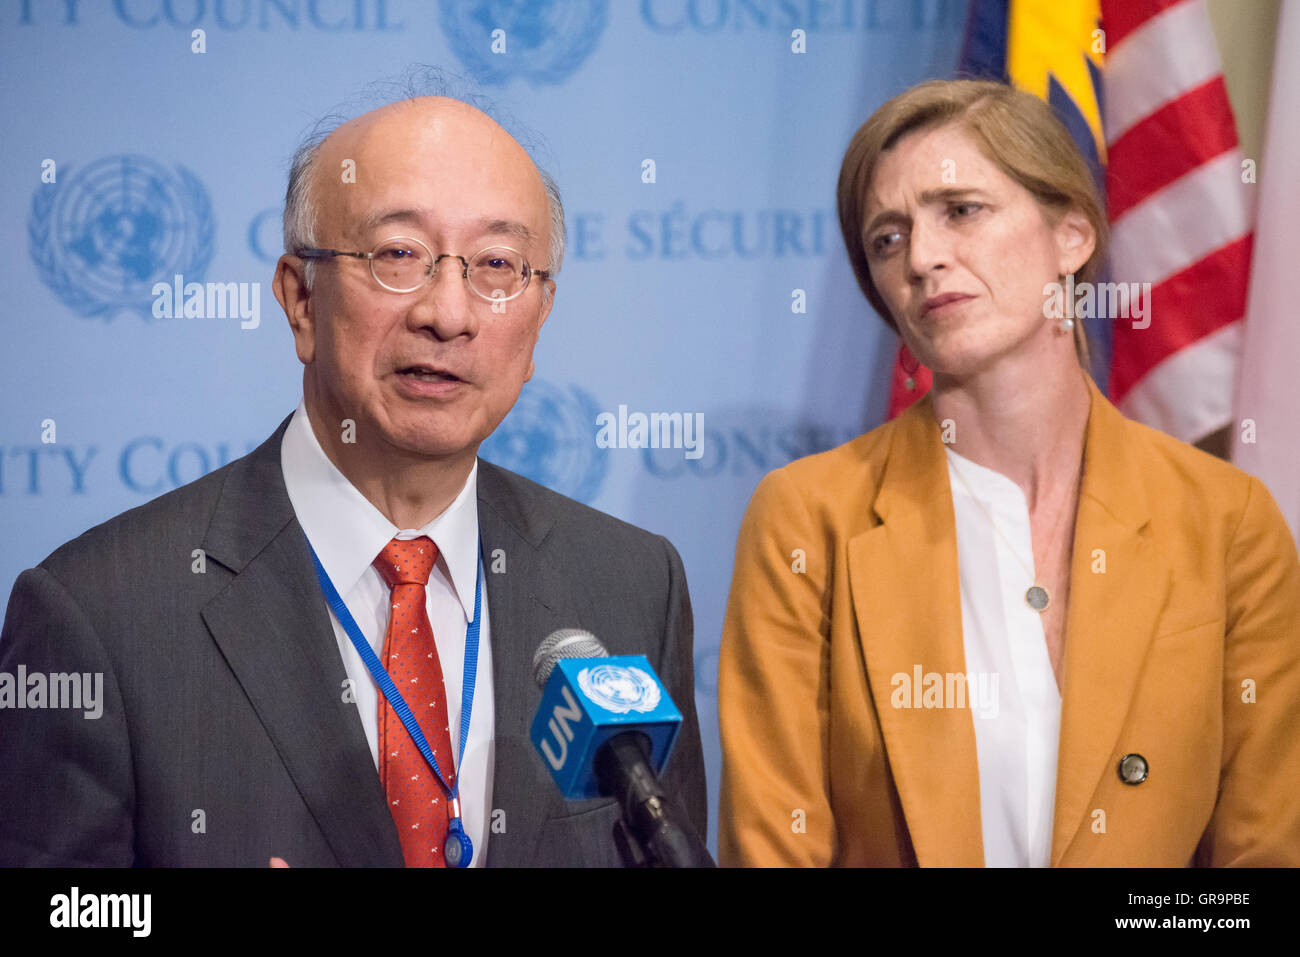 Japanese Ambassador to the United Nations Koro Bessho (left) speaks with the press. Following the September 5th test launch of what are believed to by three medium-range Rodong-class ballistic missiles by the Democratic People's Republic of Korea (DPRK) toward Japan, the United Nations Security Council held emergency consultations on the incident. Analysts believe that the test, conducted while world leaders met in China for the G20 summit, may have been conducted as a response to the possible installation of a Terminal High Altitude Area Defense (THAAD) system developed to defend South Korea Stock Photo